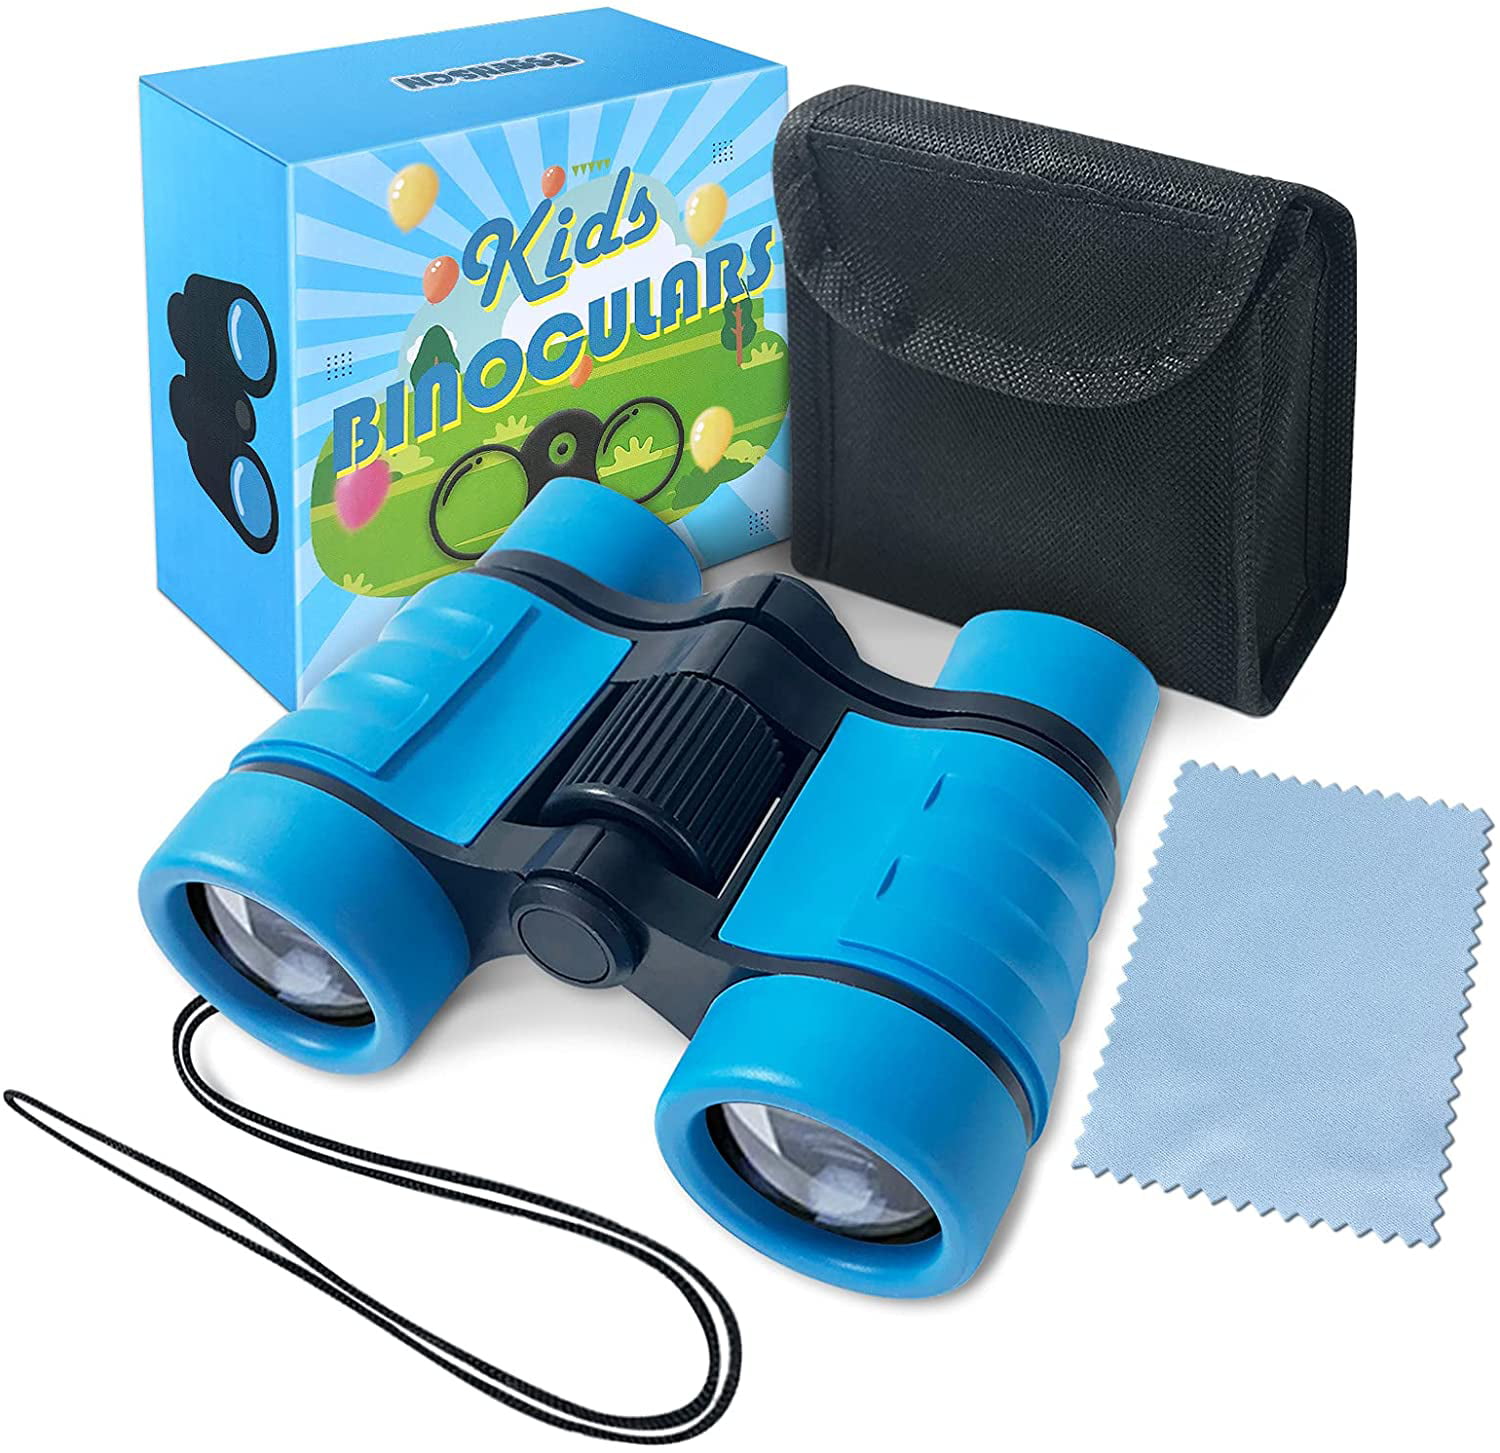 Green Snoky Kids Toys Age 3-12 Compact Binoculars for Kids Christmas Birthday Gift for Boys Age 5-8 Outdoor Toys for Kids Ages 8-12 Kids Binoculars Bird Watching Xmas Stocking Stuffers for Kids 